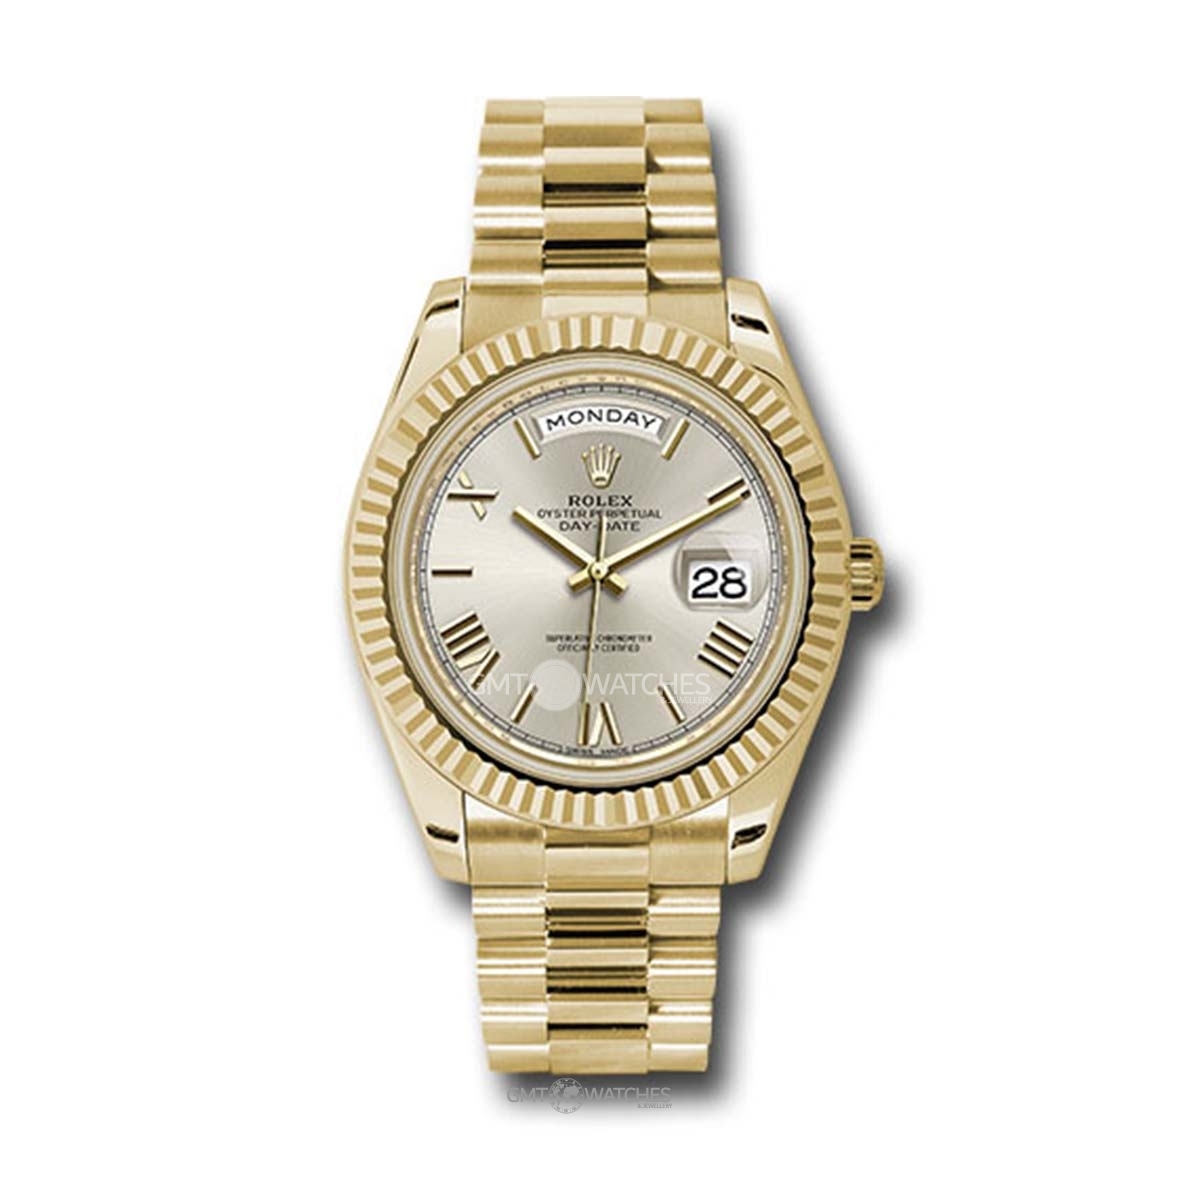 Rolex Oyster Perpetual Day-Date 40mm 18k Yellow Gold 228238 srp